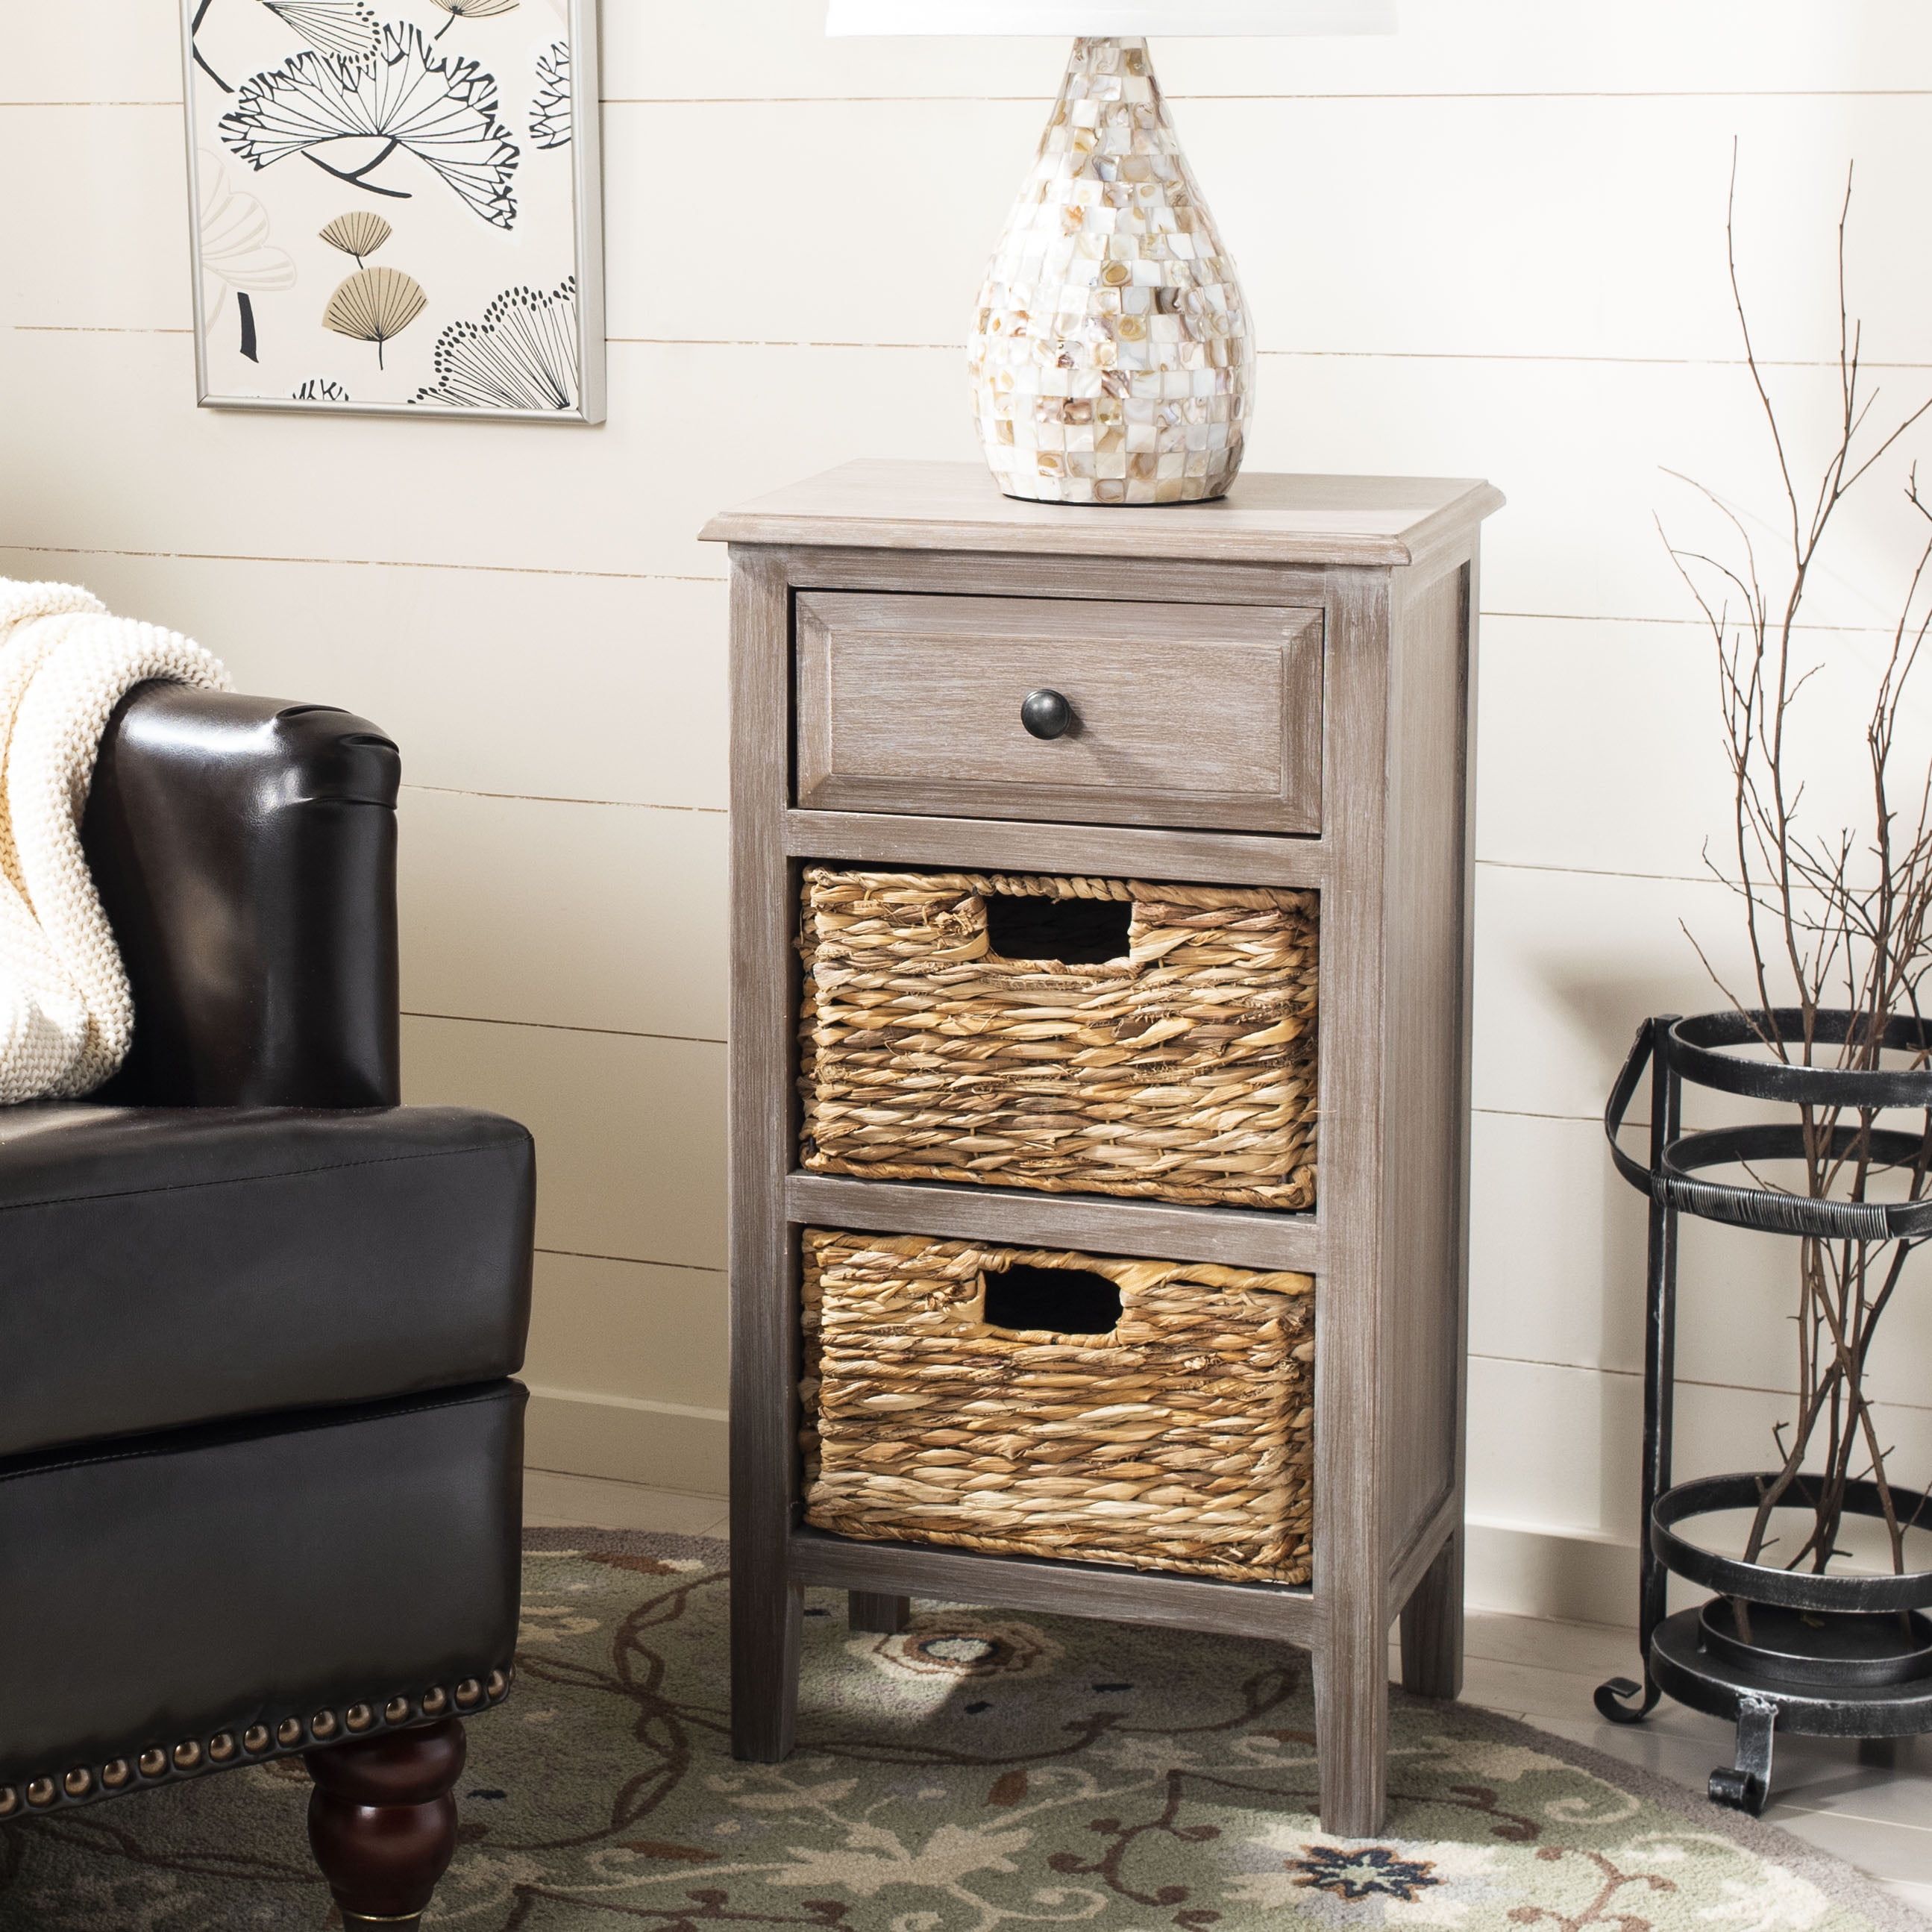 Transitional Pine and Metal Side Table with Storage Baskets